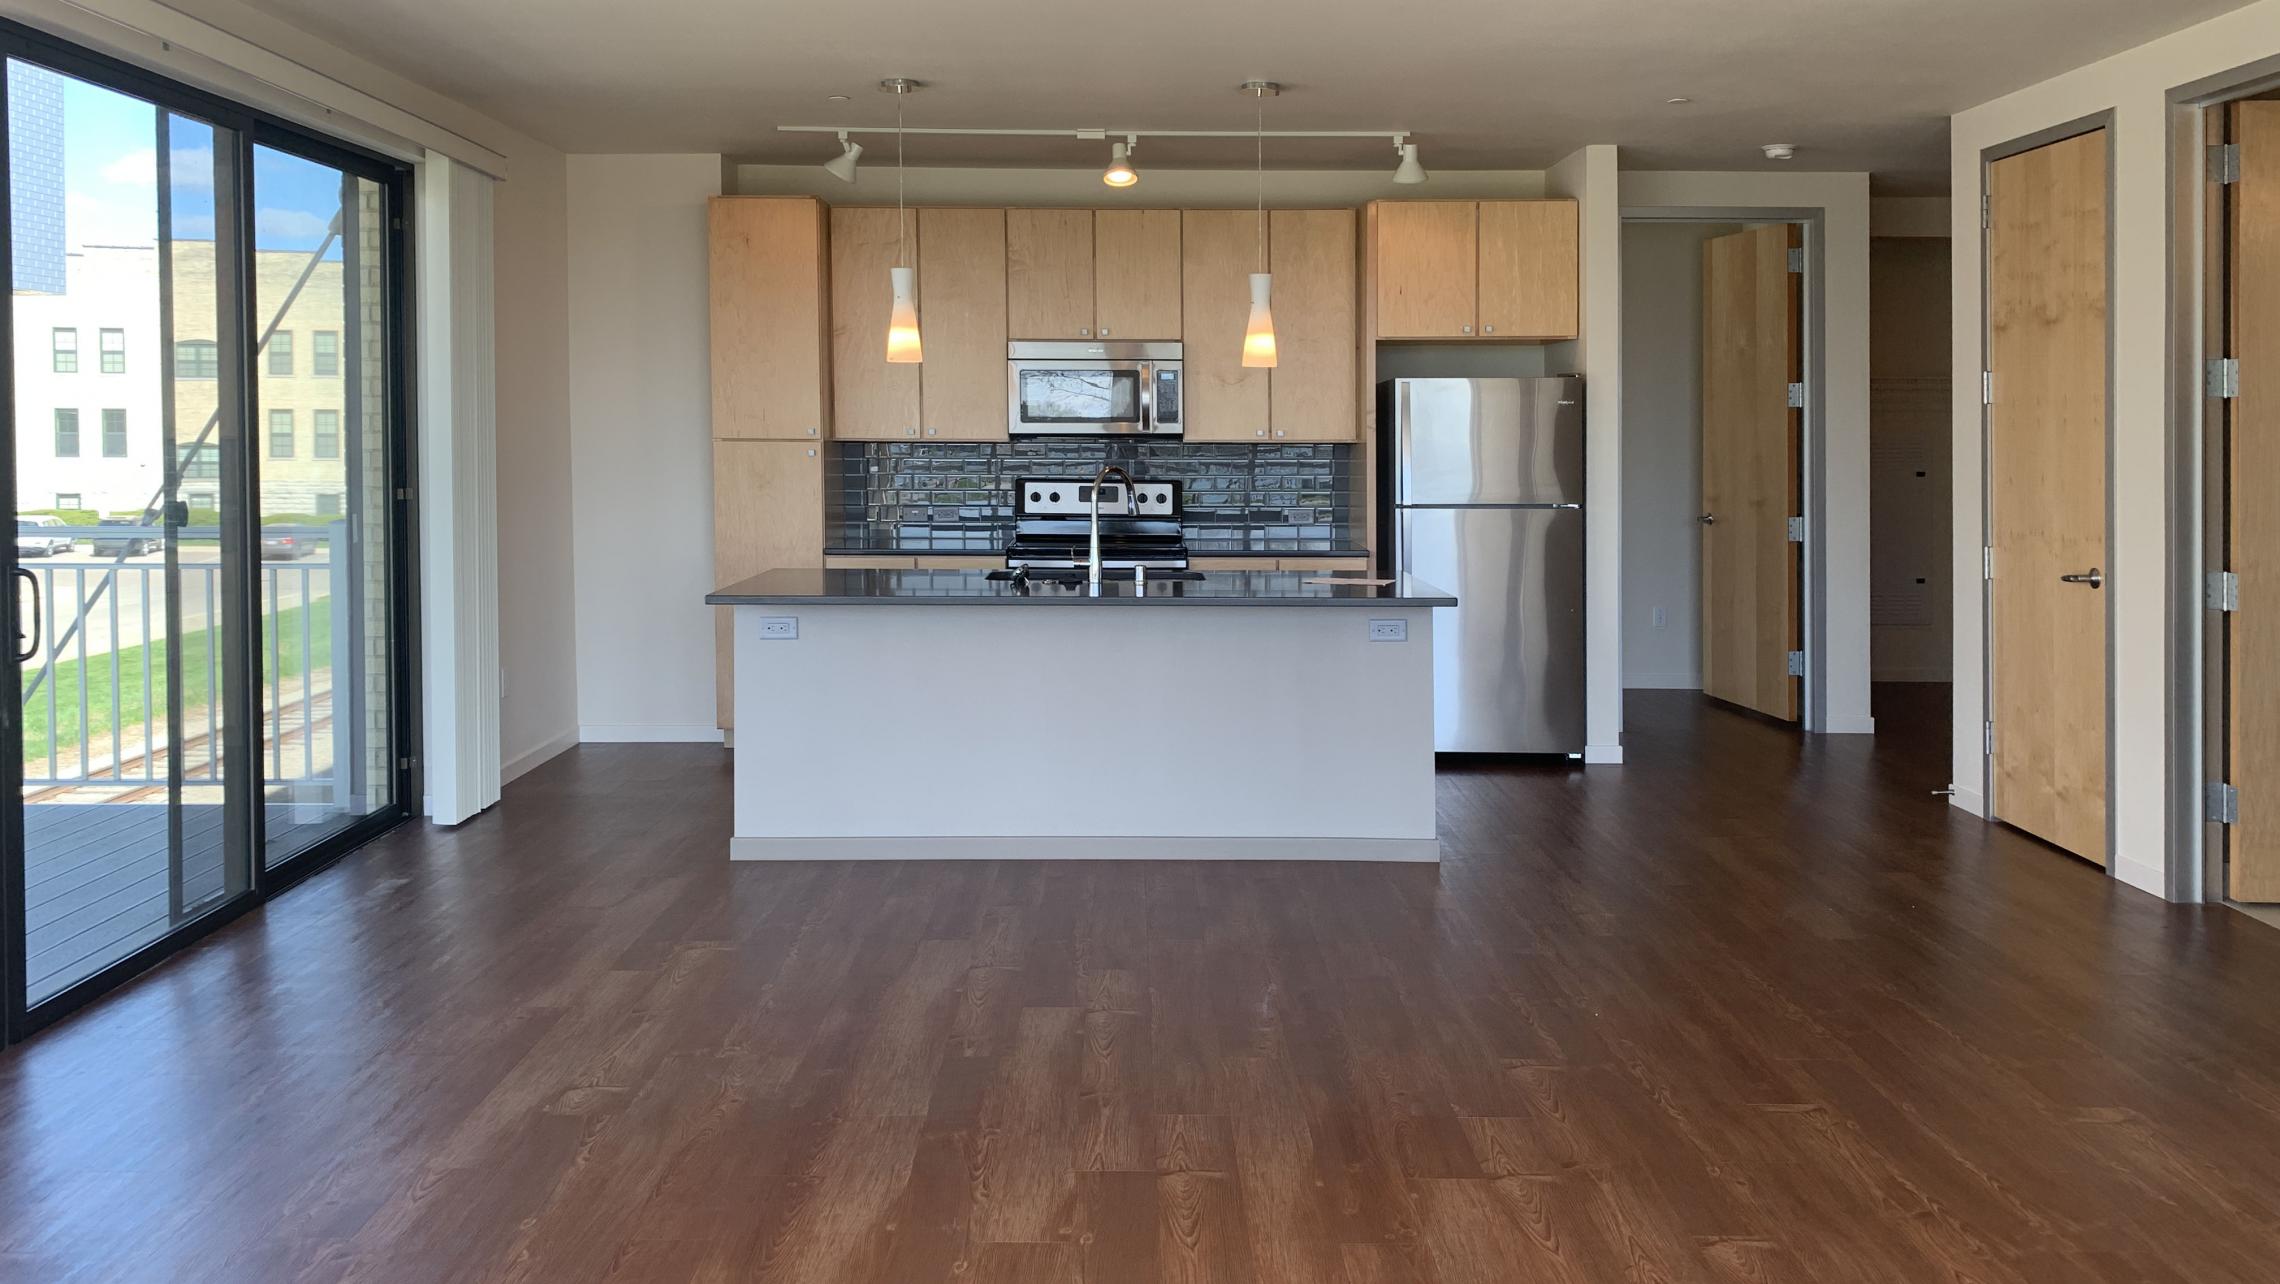 Nine-Line-at-The-Yards-Apartment-226-Two-Bedroom-Corner-Lake-View-Natural-Light-Sunny-Modern-Upscale-Designe-Luxury-Luxurious-Balcony-Views-Fitness-Lounge-Courtyard-Dogs-Cats-Bike-Trail-Downtown-Capitol